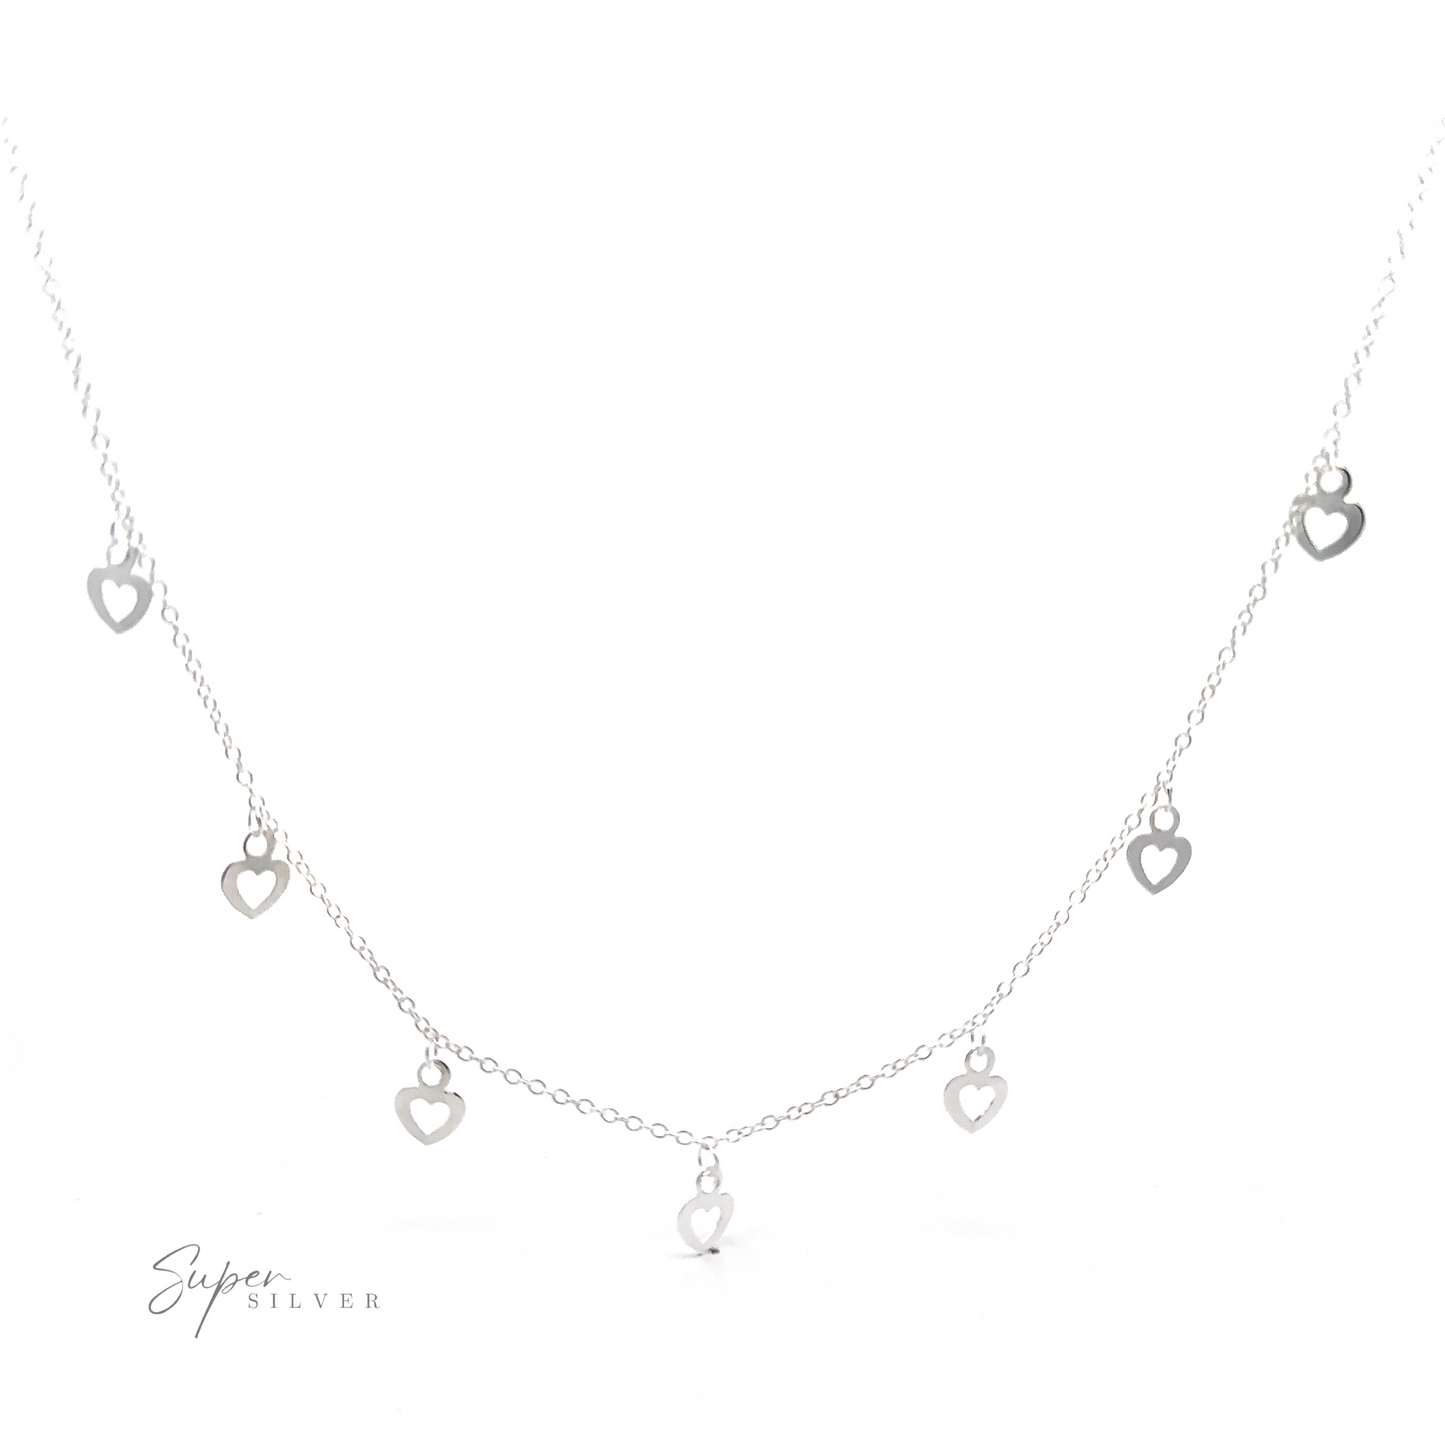 
                  
                    A delicate Silver Open Heart Charm Necklace features small open heart charms evenly spaced along the chain, set against a white background with the "Super Silver" logo in the bottom left corner.
                  
                